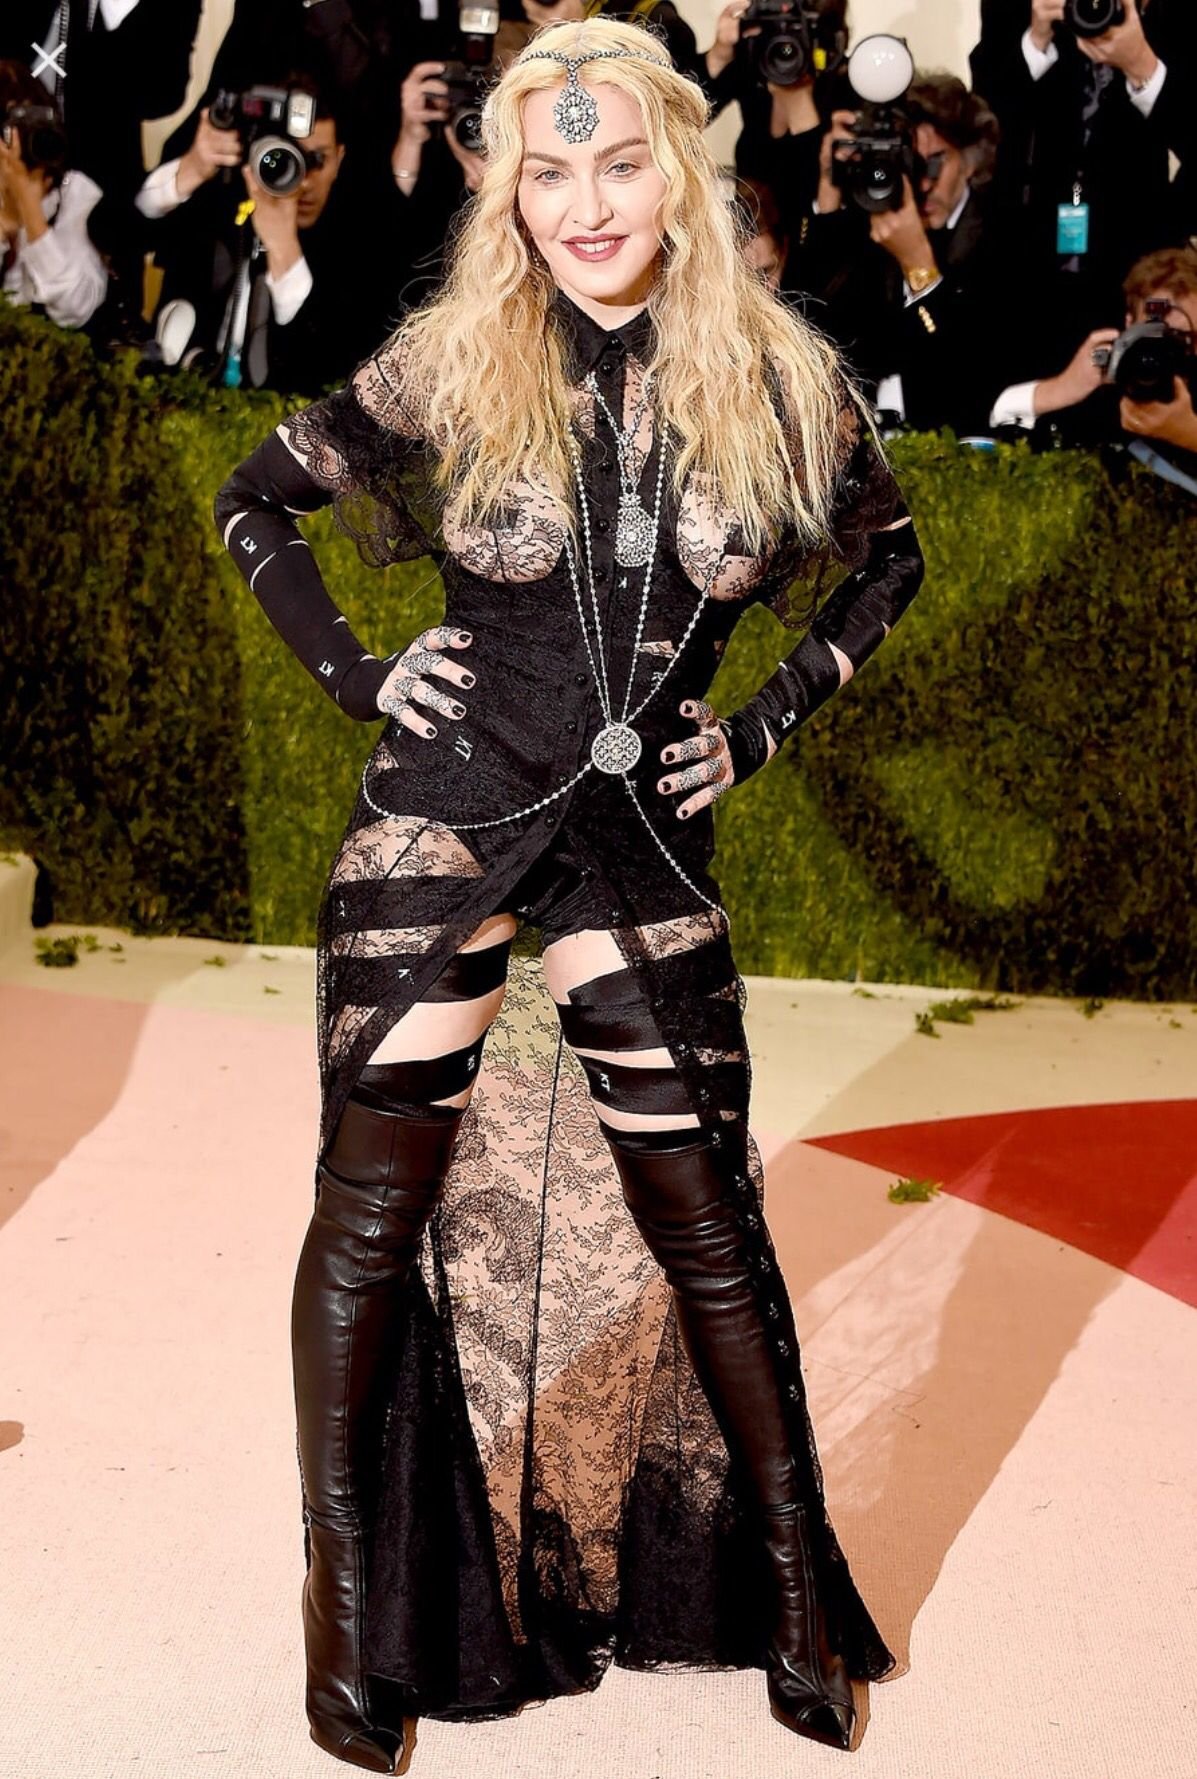 Your favorite Madonna Met Gala Look! - News ✖ Discussion - Madonna Infinity